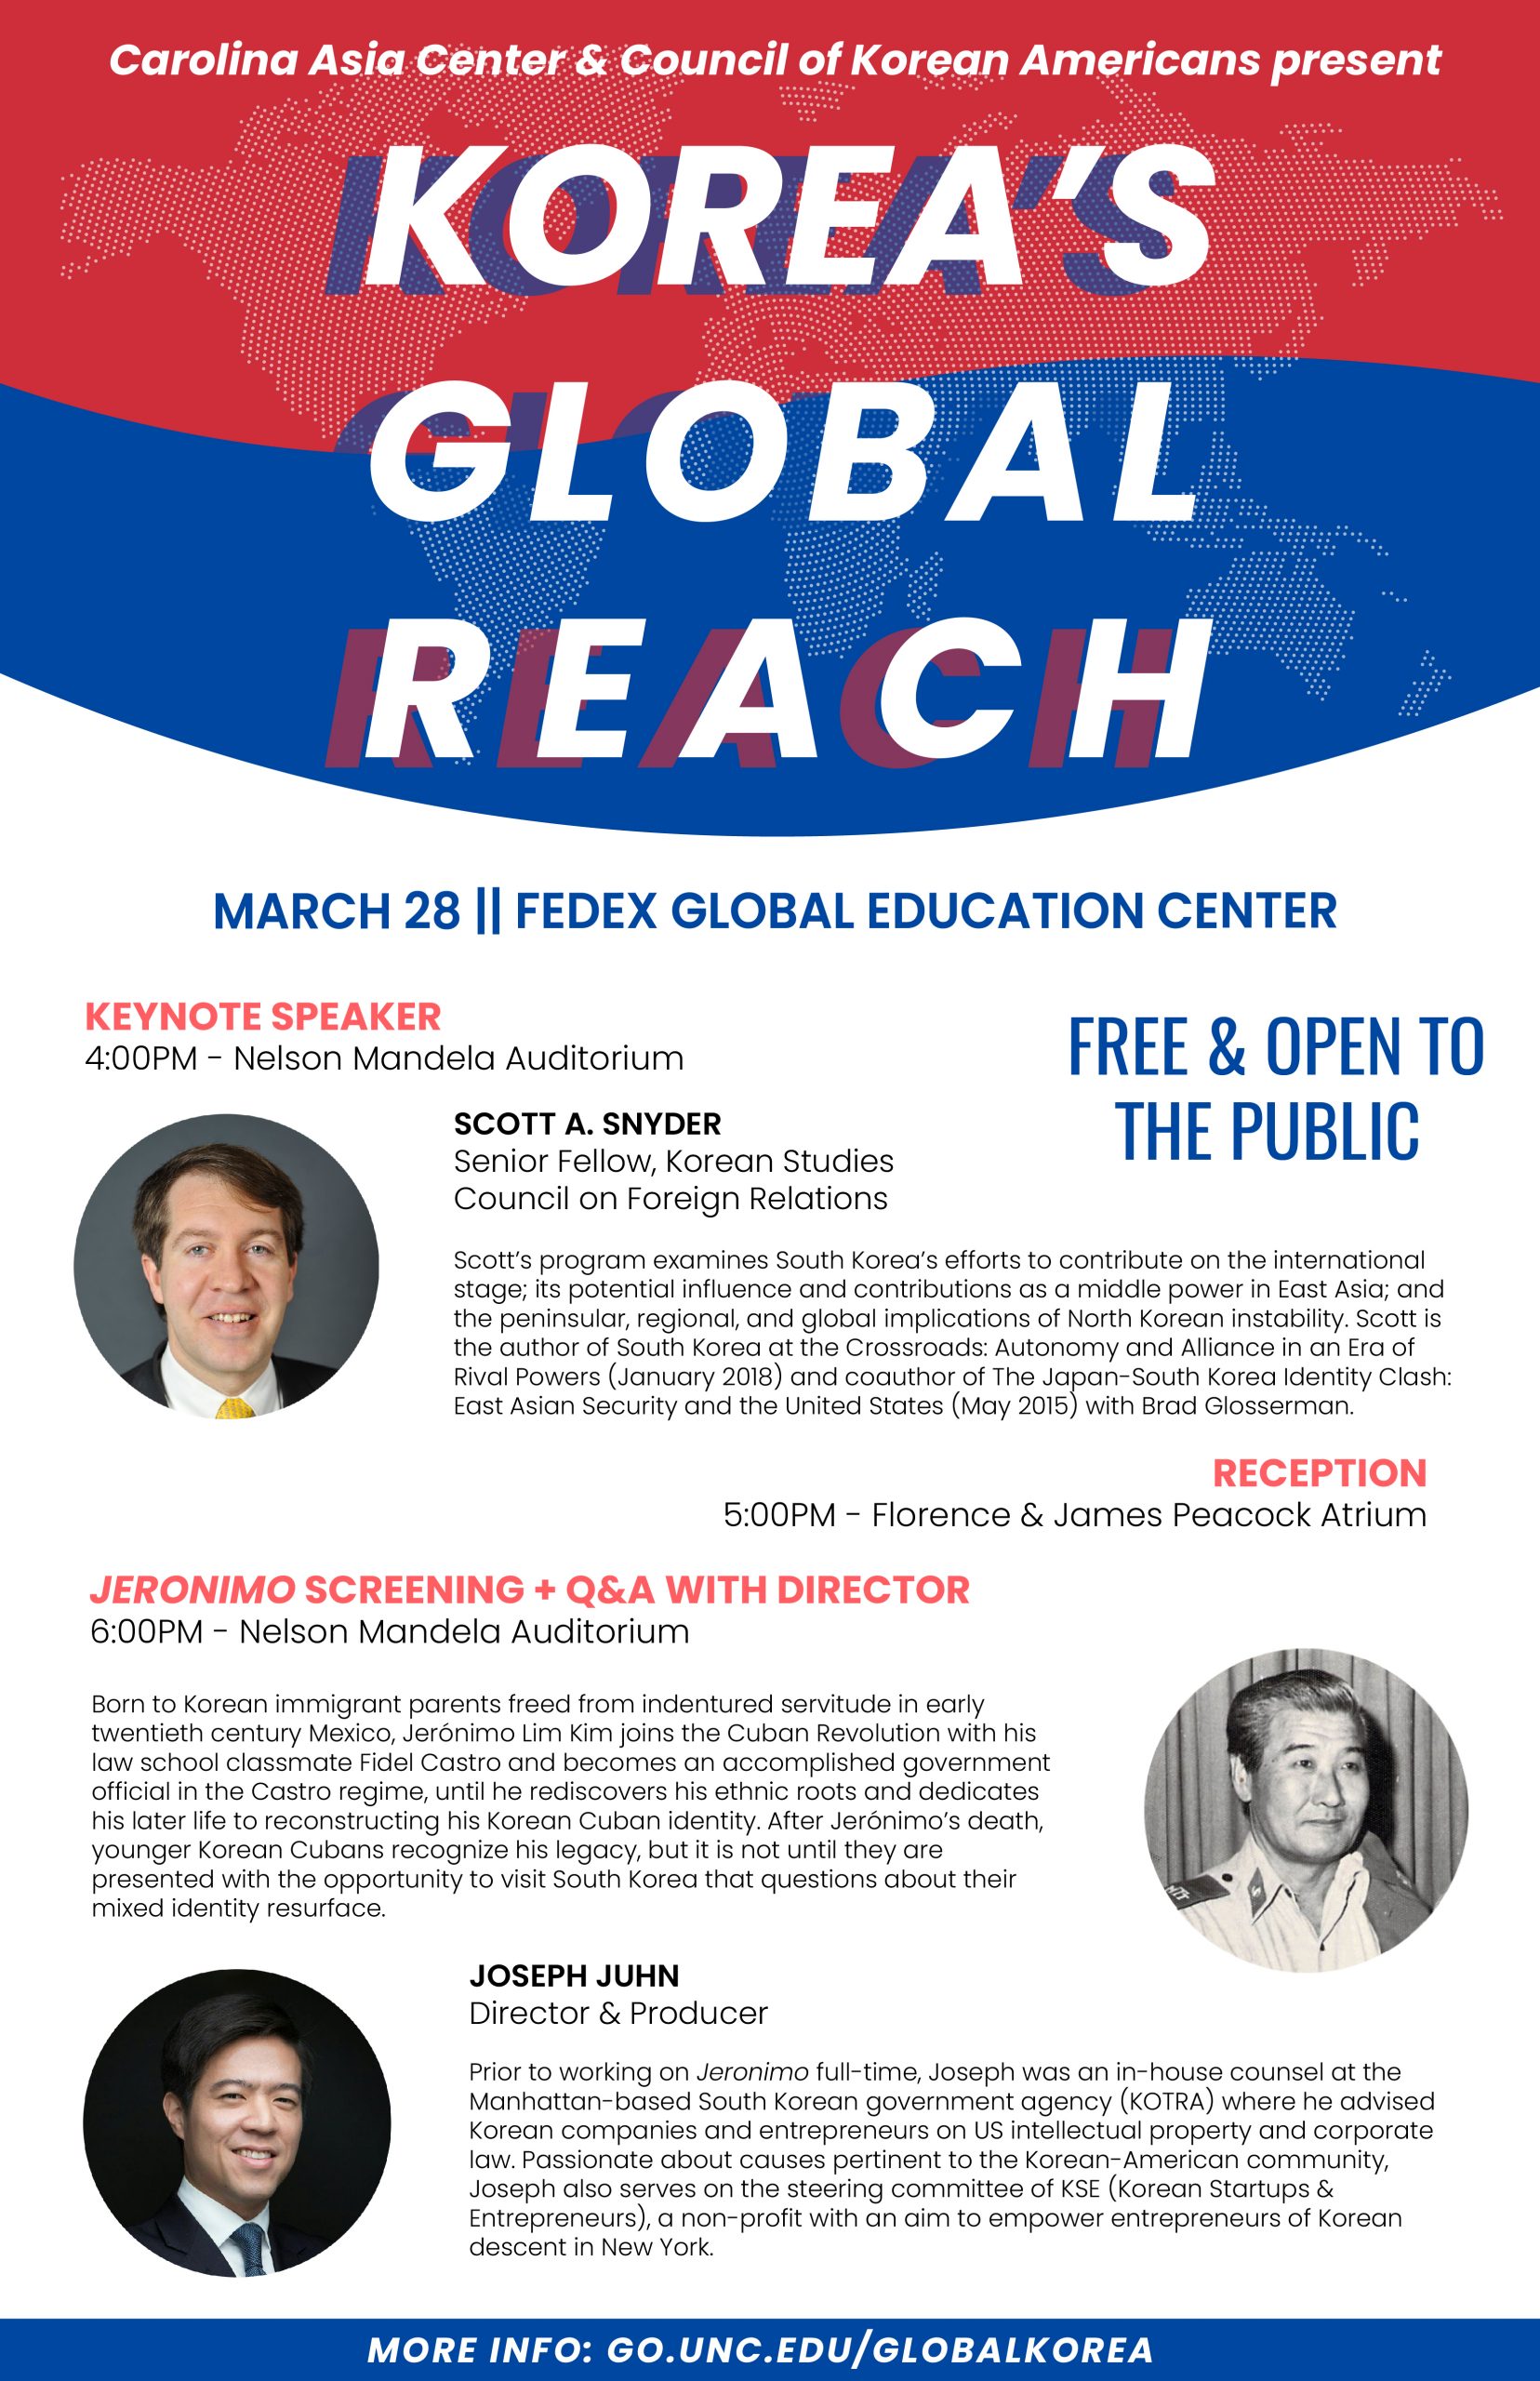 Korea's Global Reach, Scott Snyder, Jeronimo screening, Joseph Juhn, Council on Foreign Relations